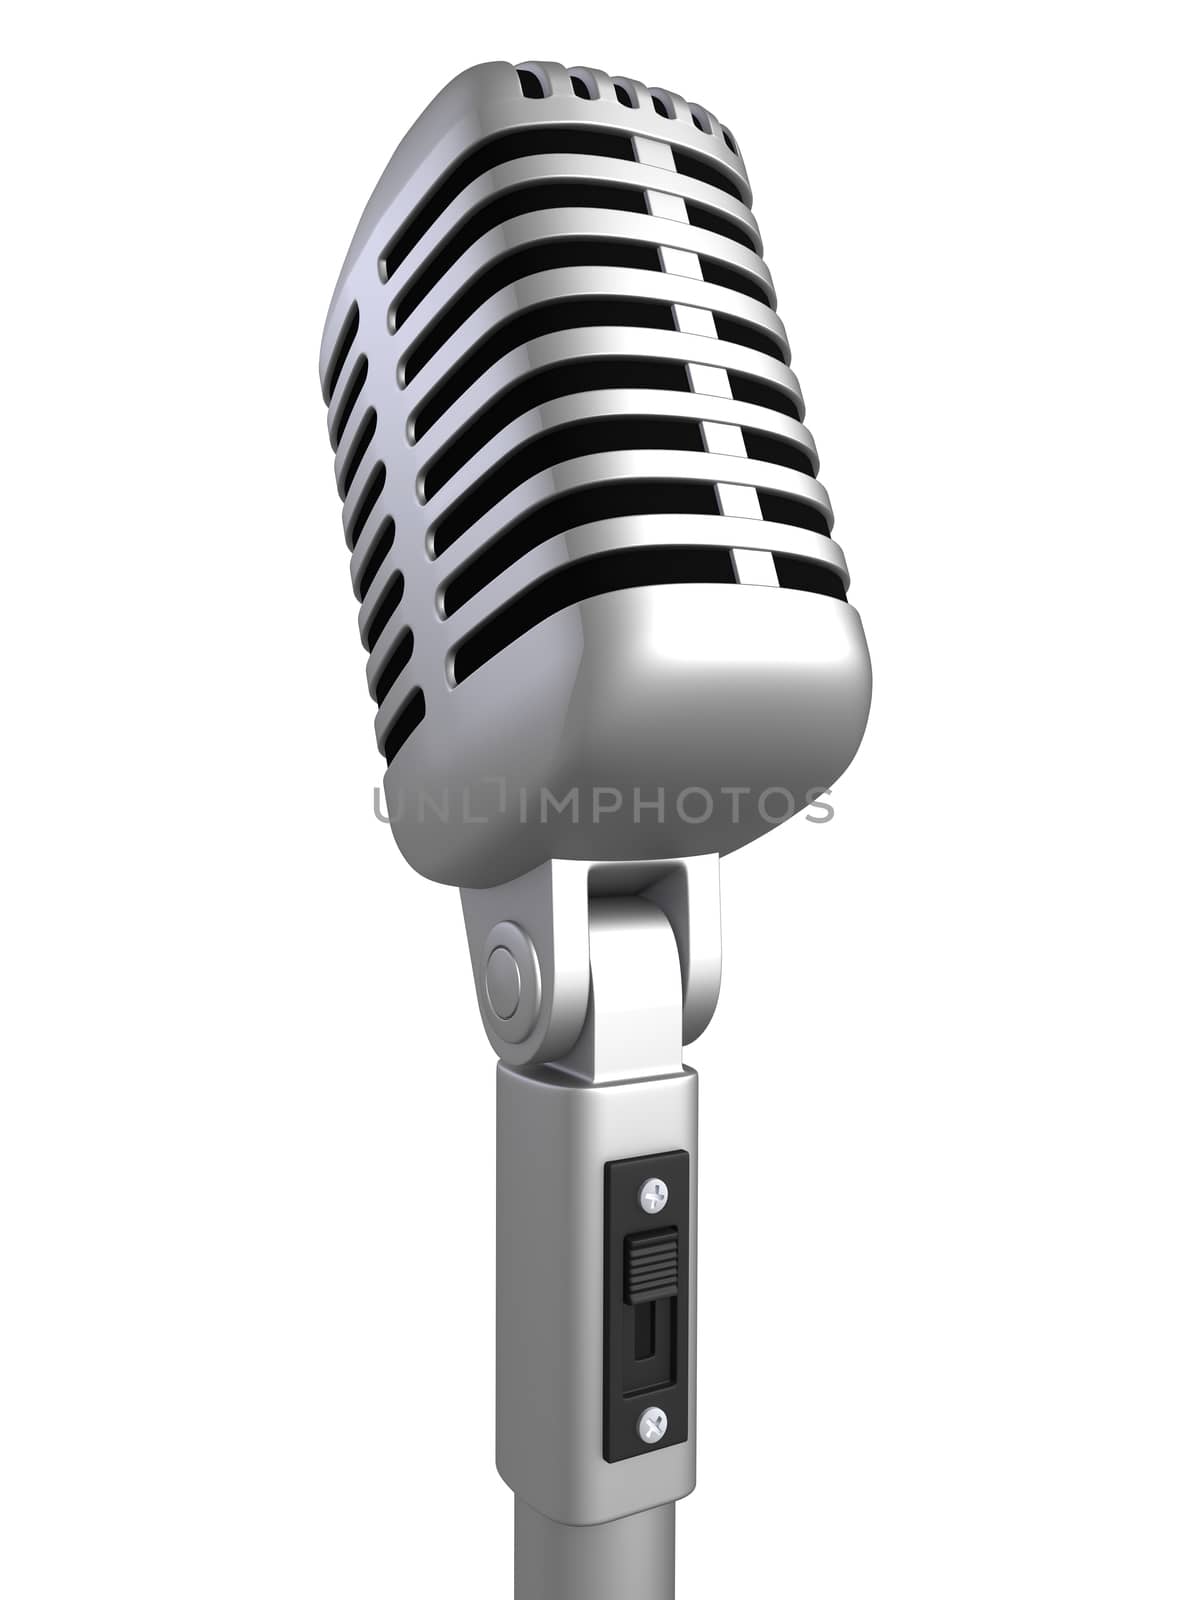 retro microphone on a white background (isolated)